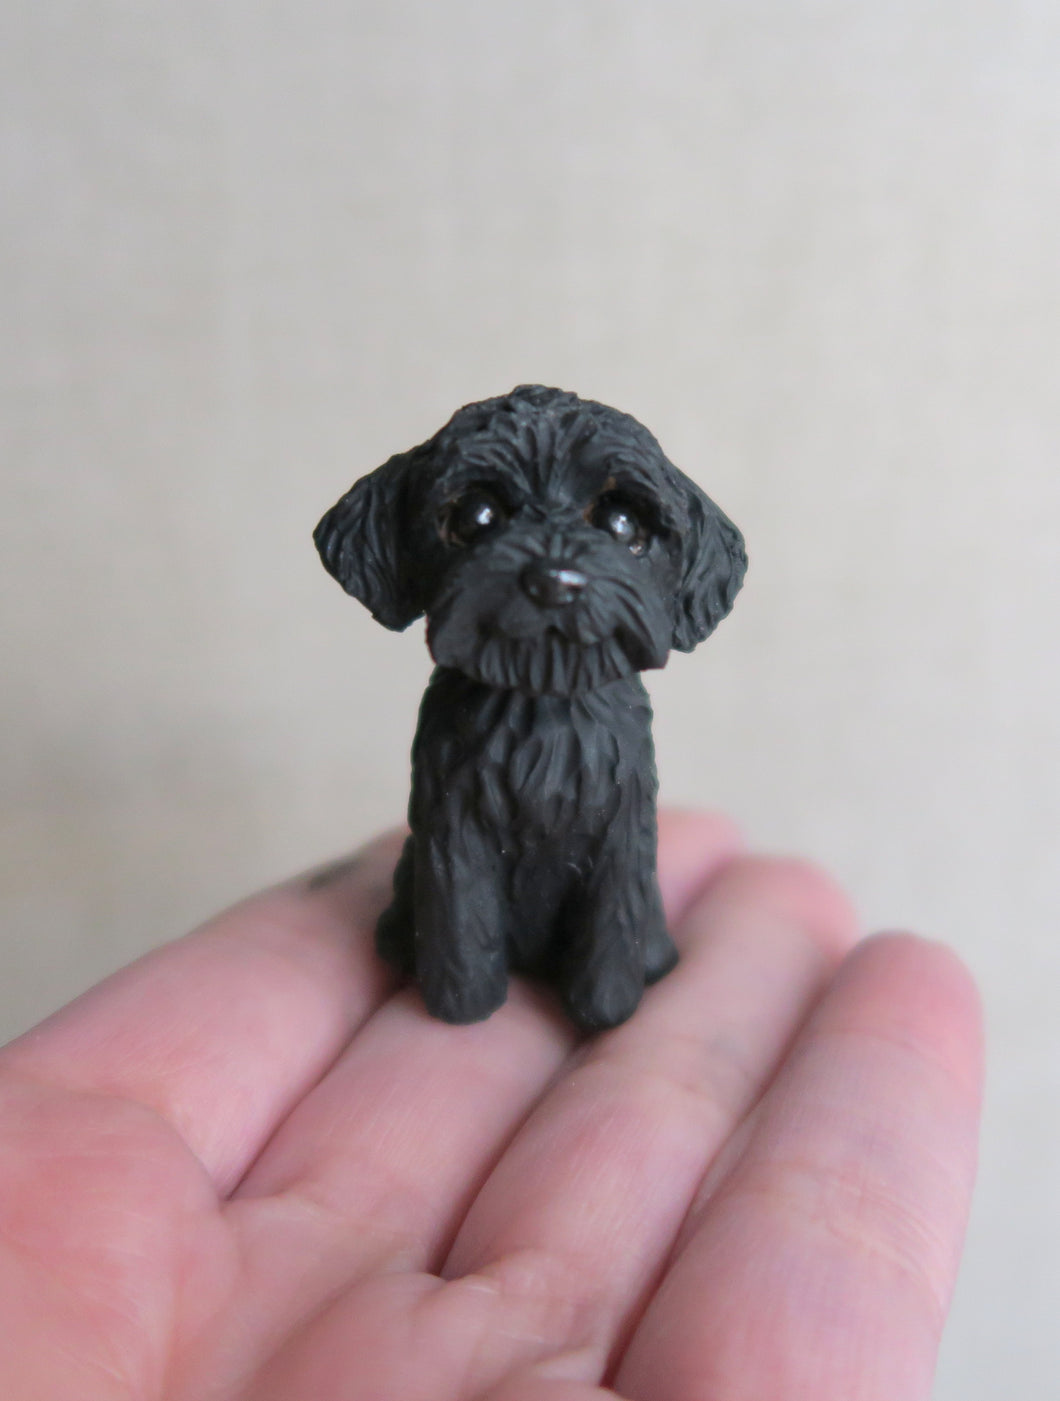 Mini Doodle dog -Labradoodle, Goldendoodle, Schnoodle- any poodle mix- Handmade Resin Collectible